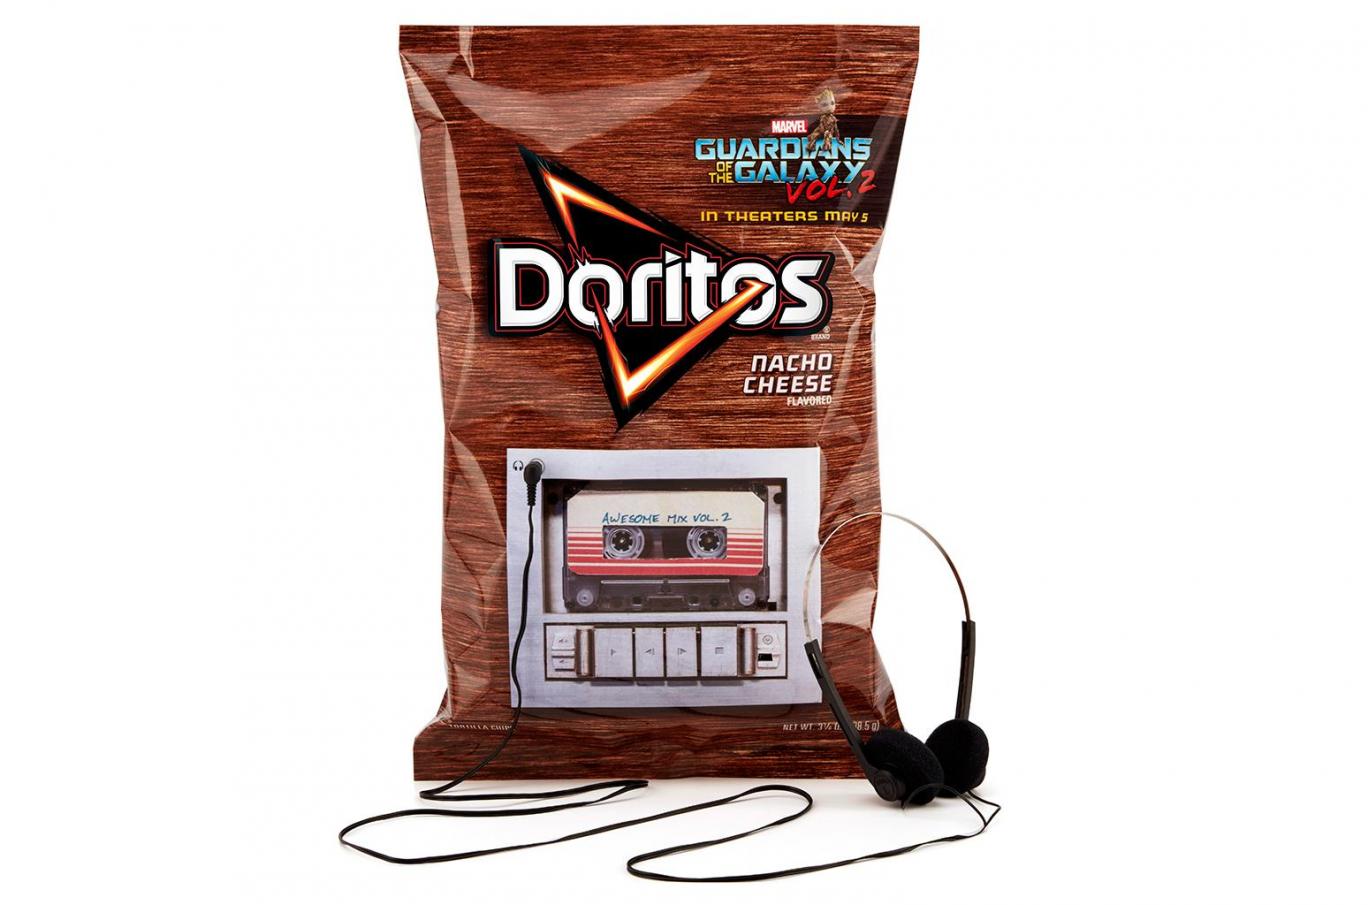 “Guardians Of The Galaxy Vol. 2” And Doritos Have Teamed Up For this awesome chip bag!